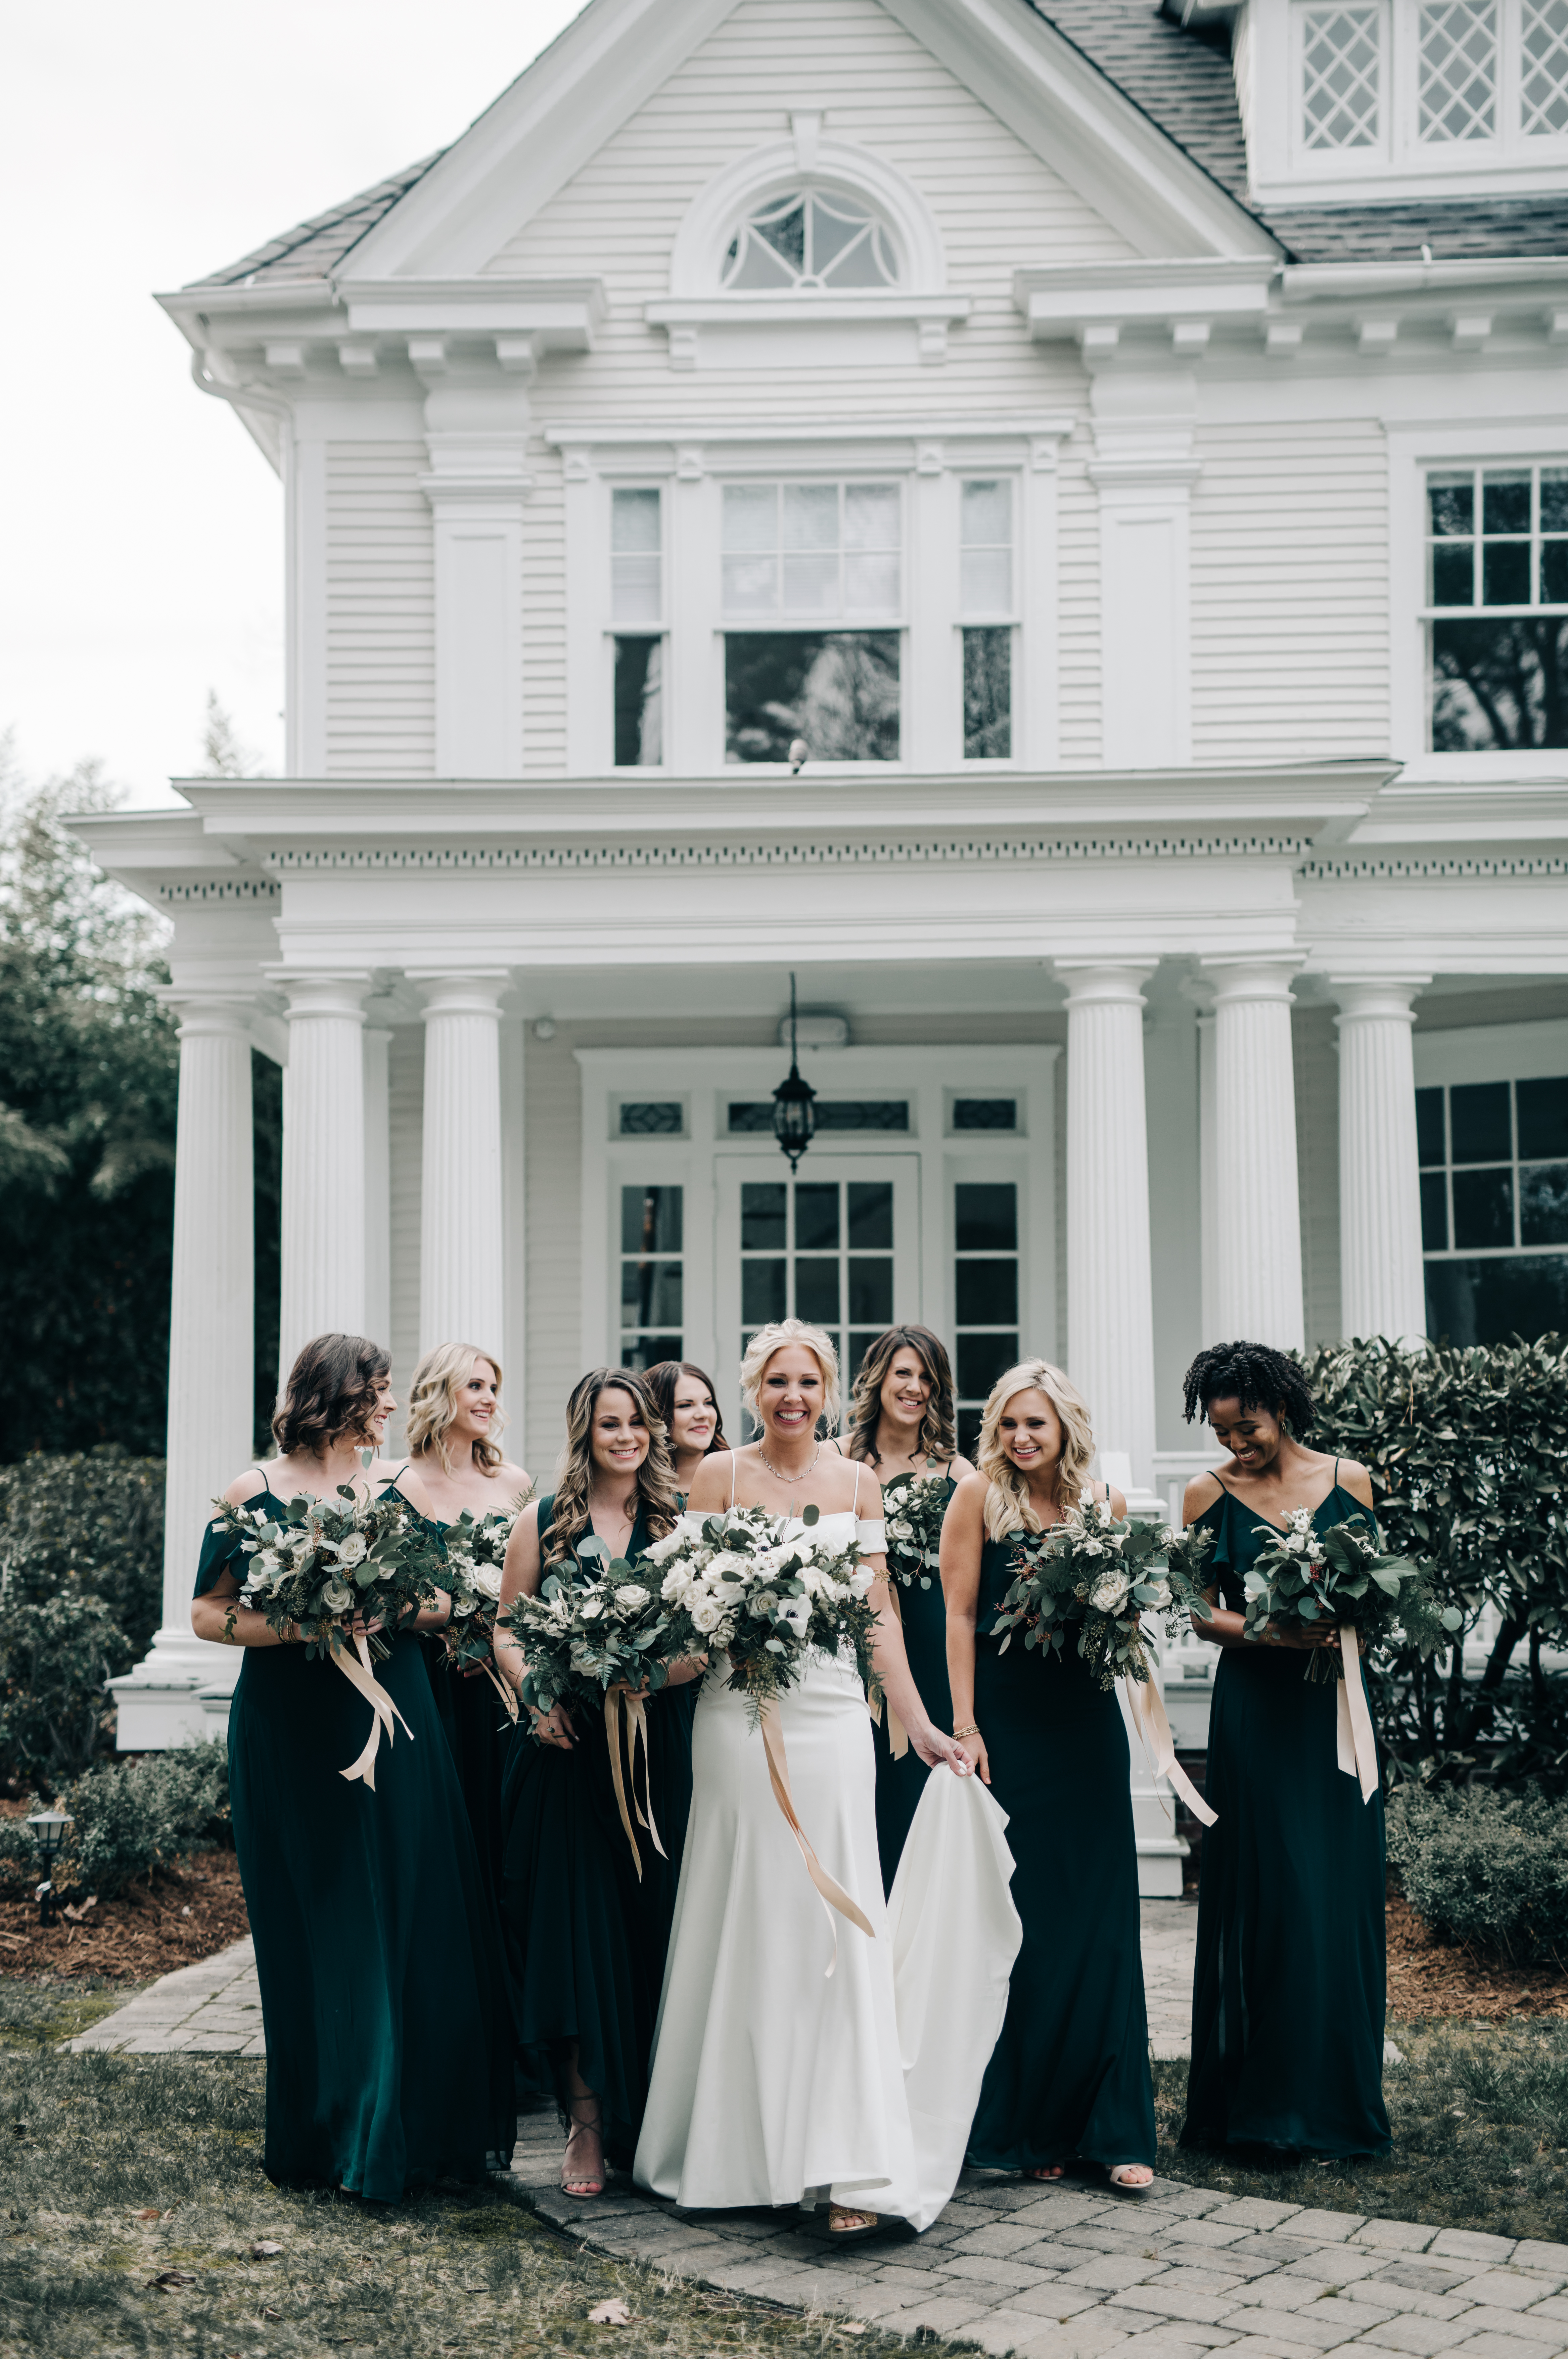 Emerald green bridesmaid dresses at McAlister-Leftwich House | Greensboro, NC